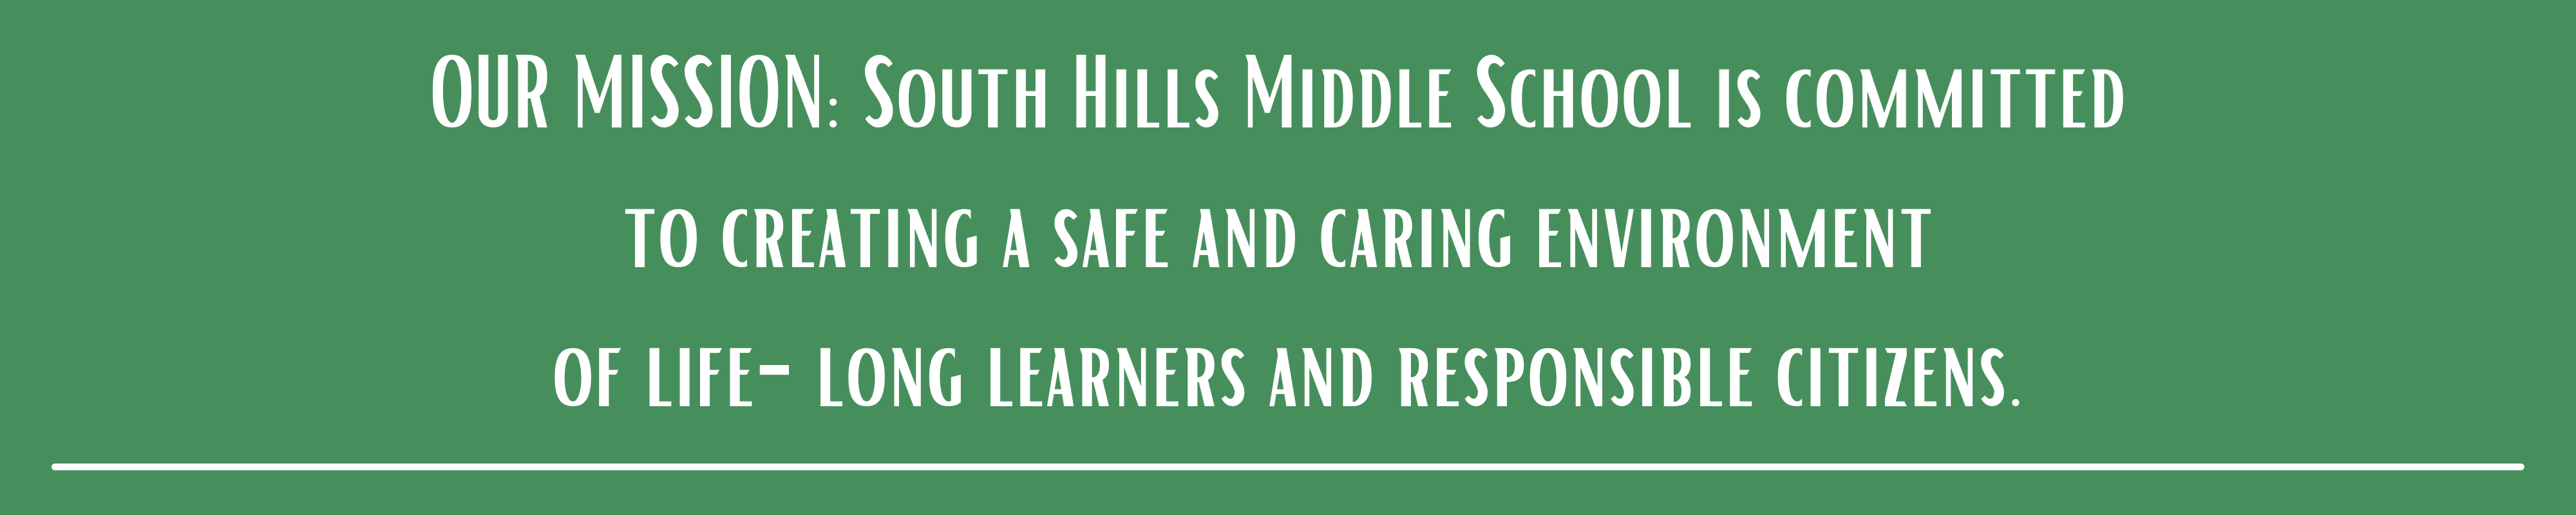 Our Mission: South Hills Middle School is committed to creating a safe and caring environment of life-long learners and responsible citizens.